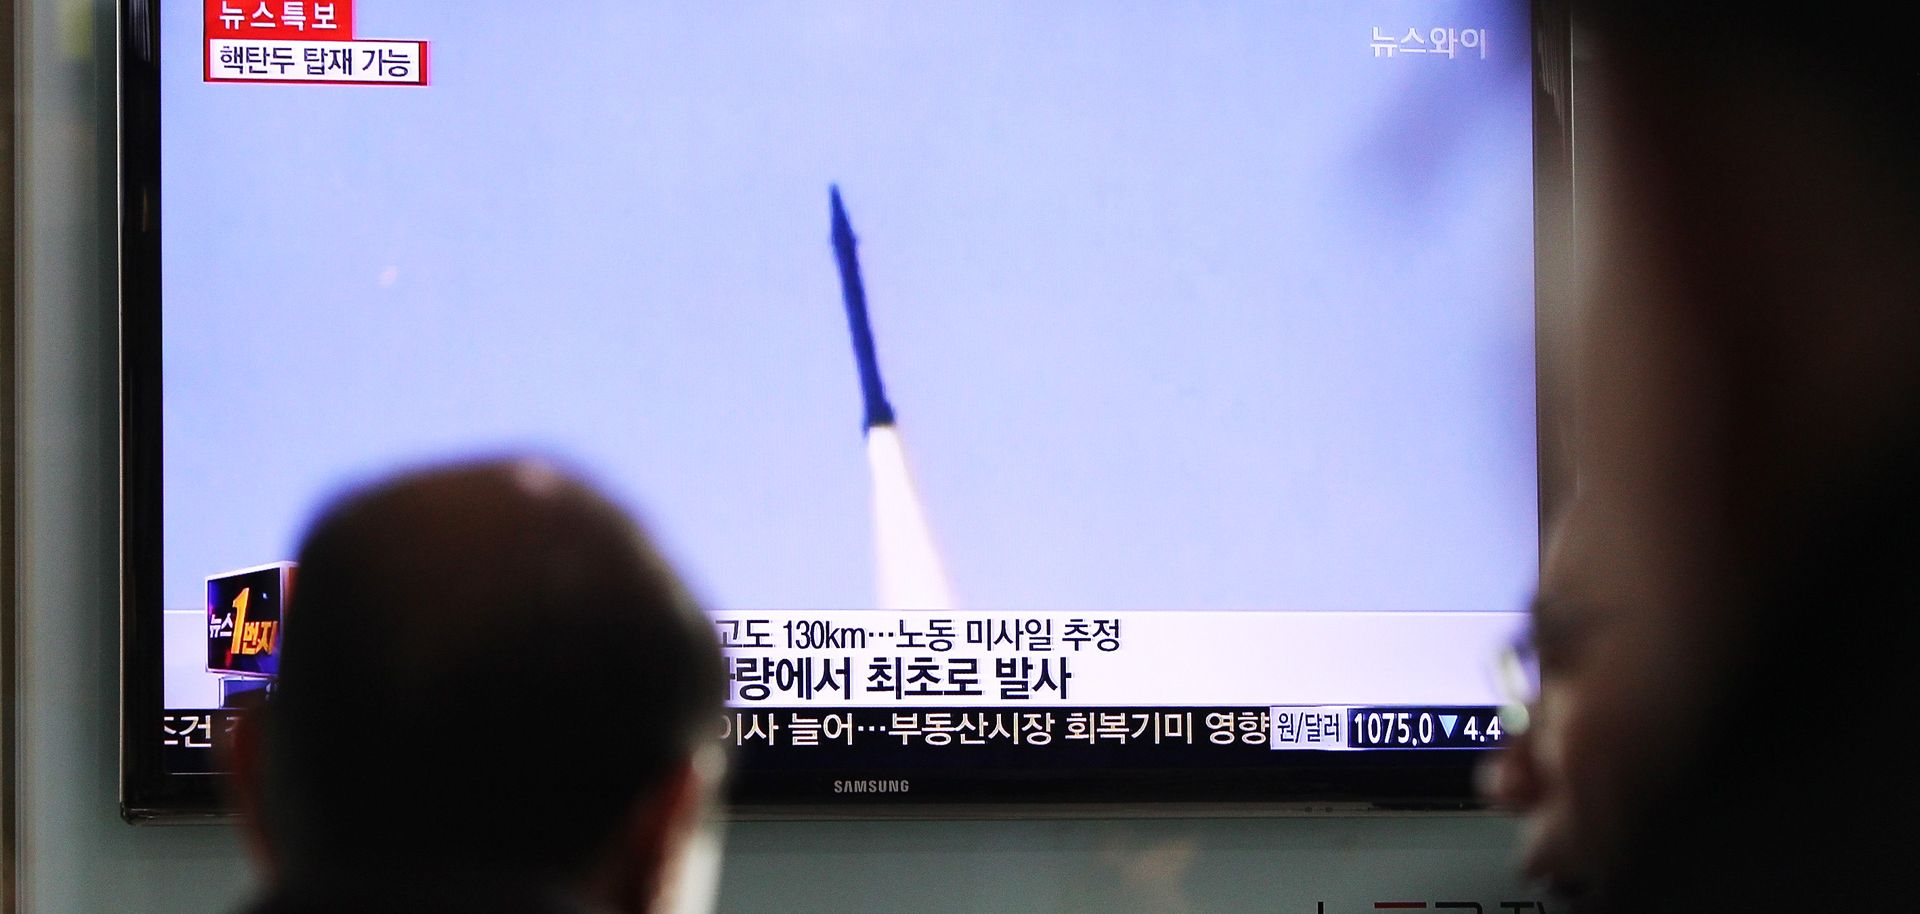 North Korea Makes Improvements to Missile Systems